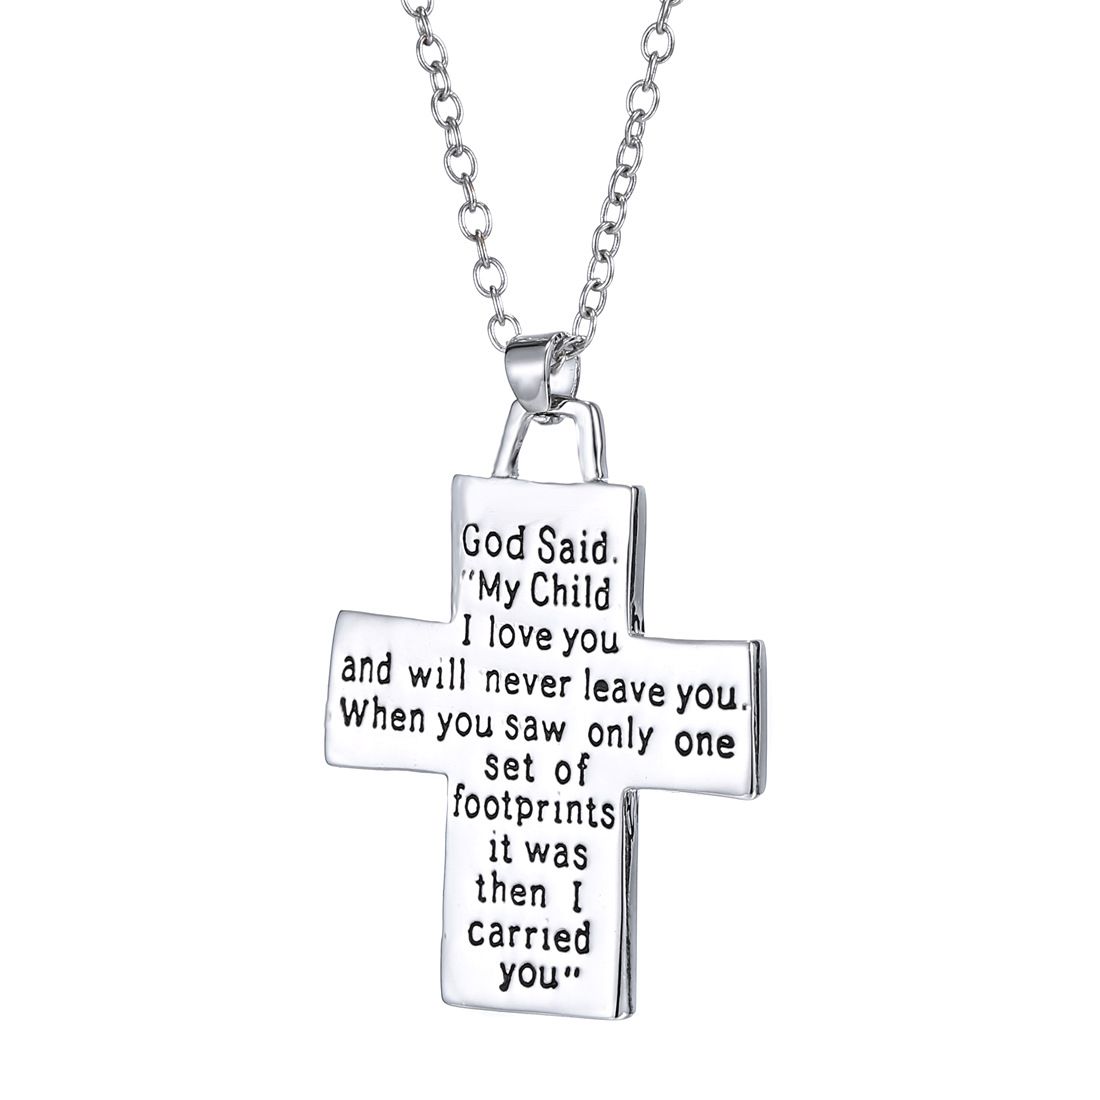 Gifts Cute Jewelry Baby Footprints Prayer Necklace Cross Pendant Memory Chain